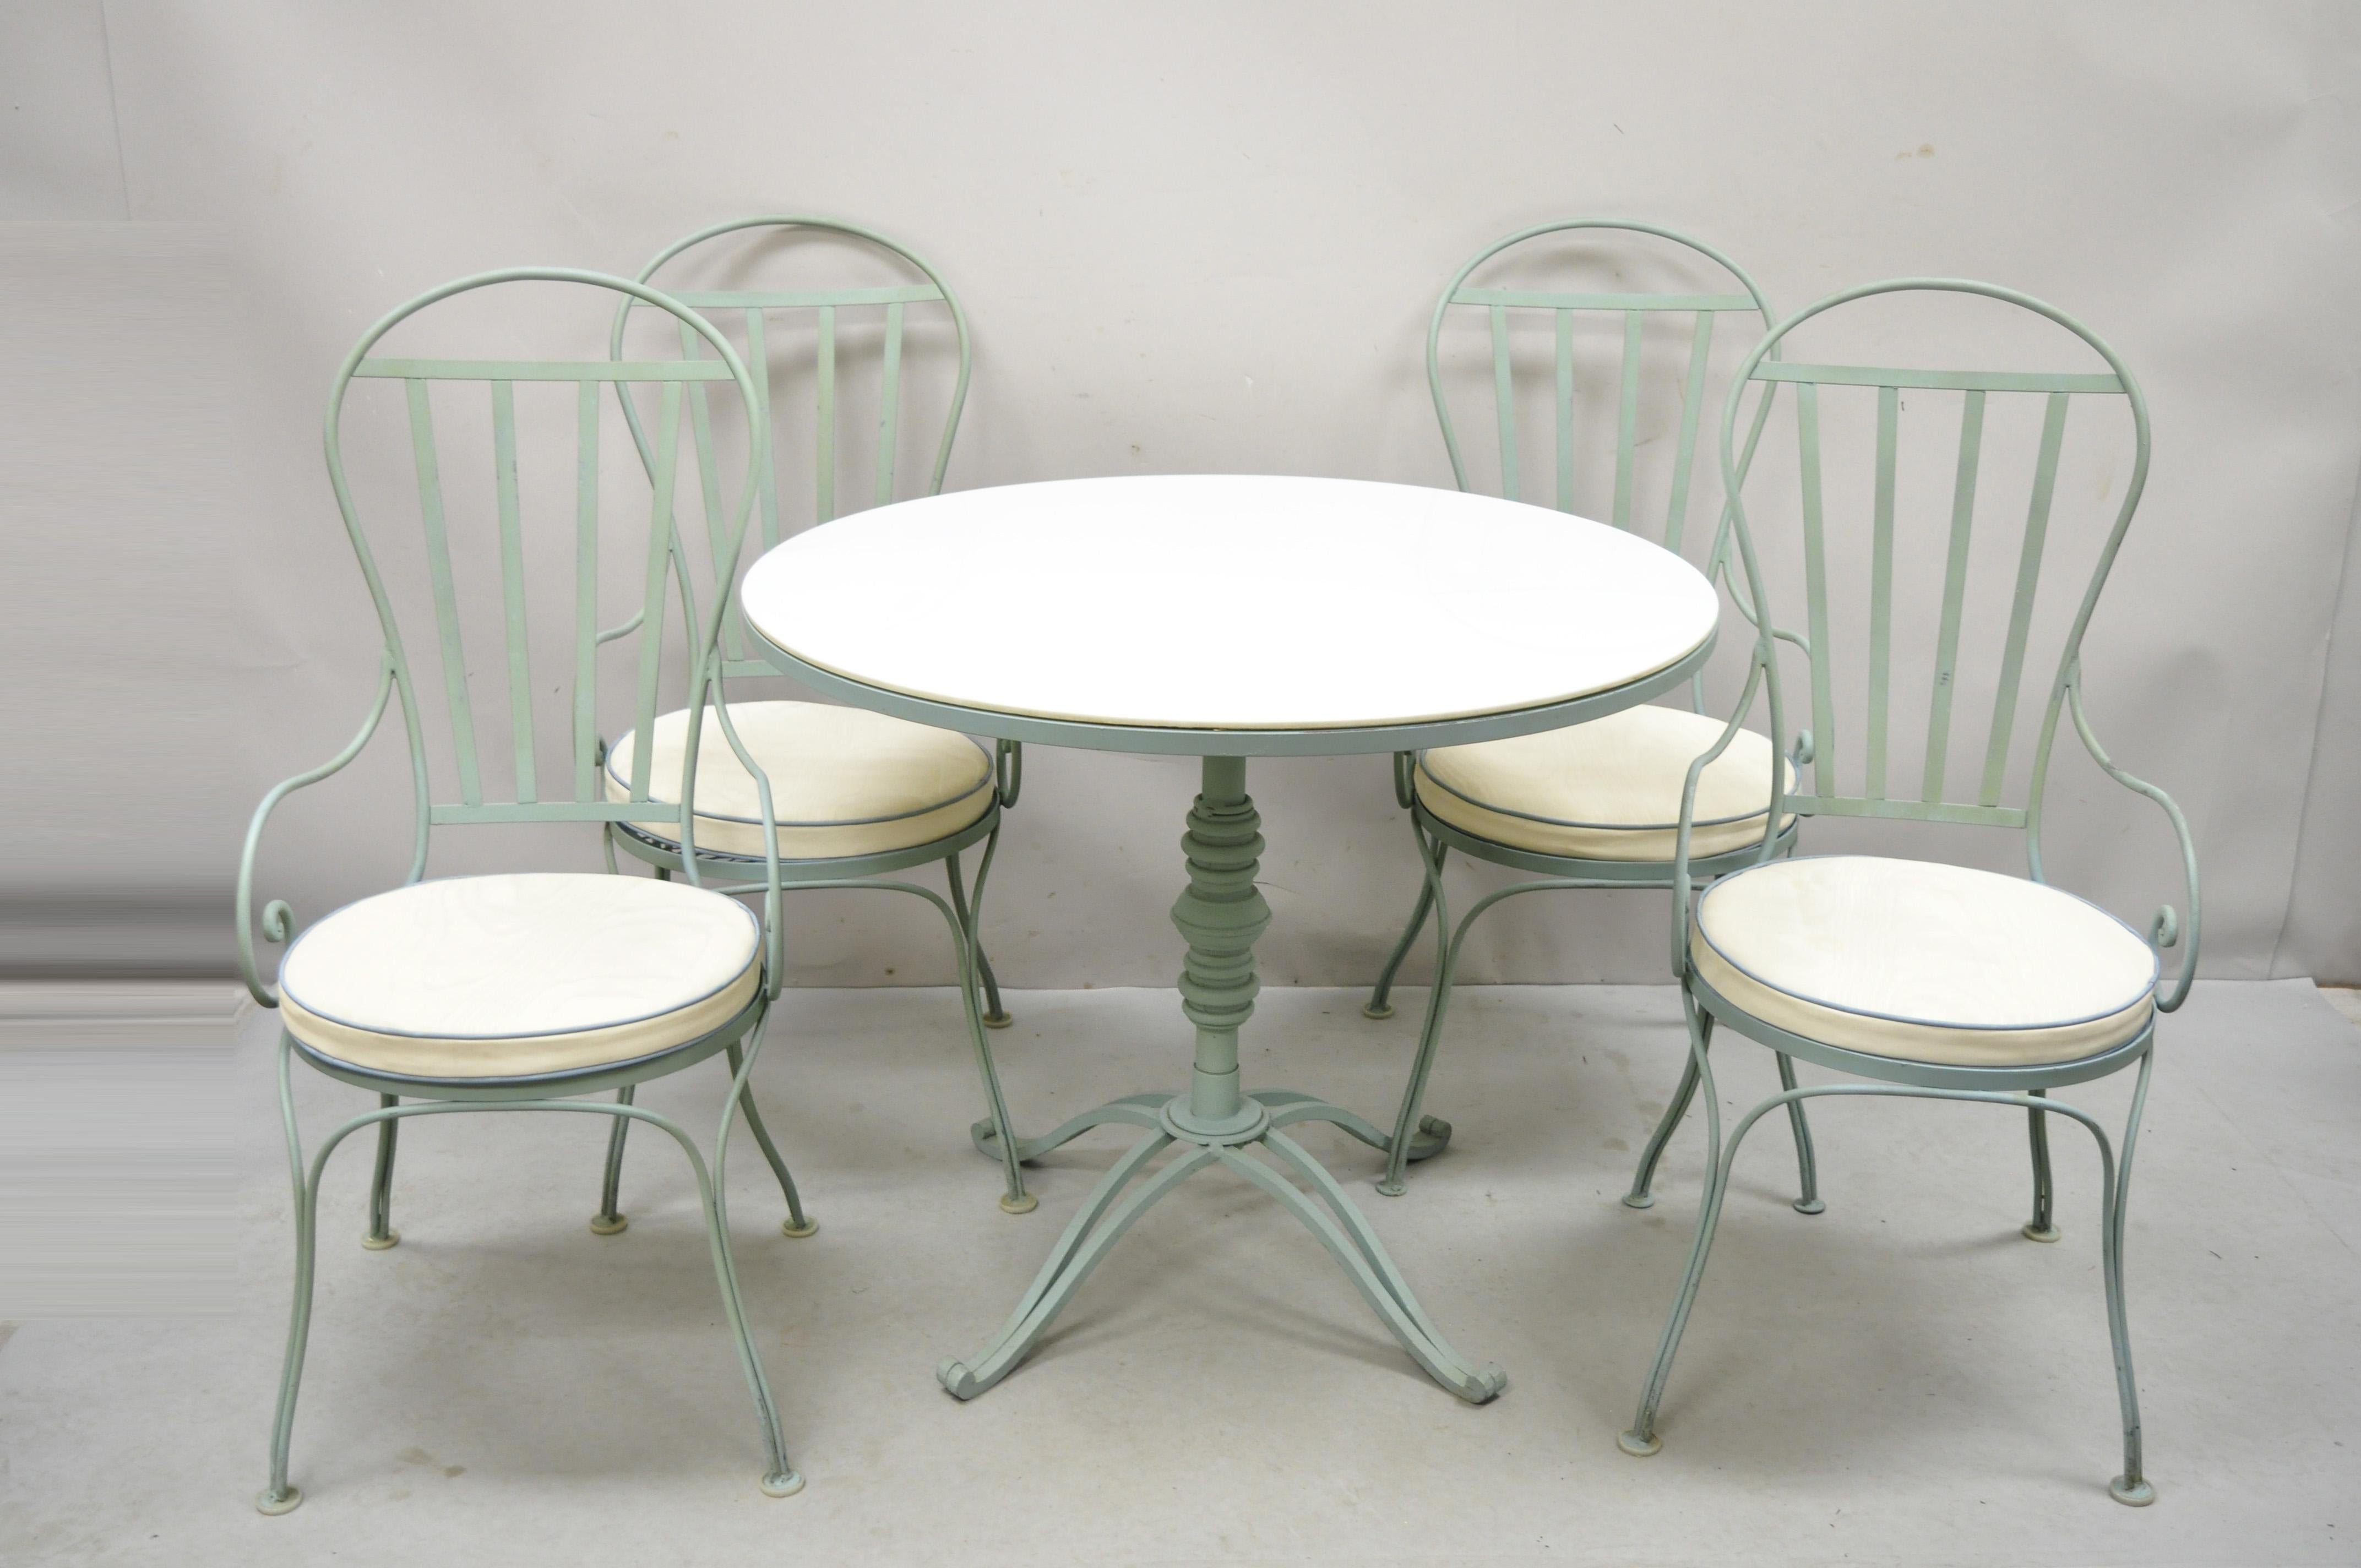 Vintage Italian Salterini Style Wrought Iron Scrolling Dining Set French Bistro Table - 5 pc Set. Item features 4 arm chairs, 1 round table with vitrolite milk glass top, iron French pastry bistro style pedestal base, very nice vintage set, quality